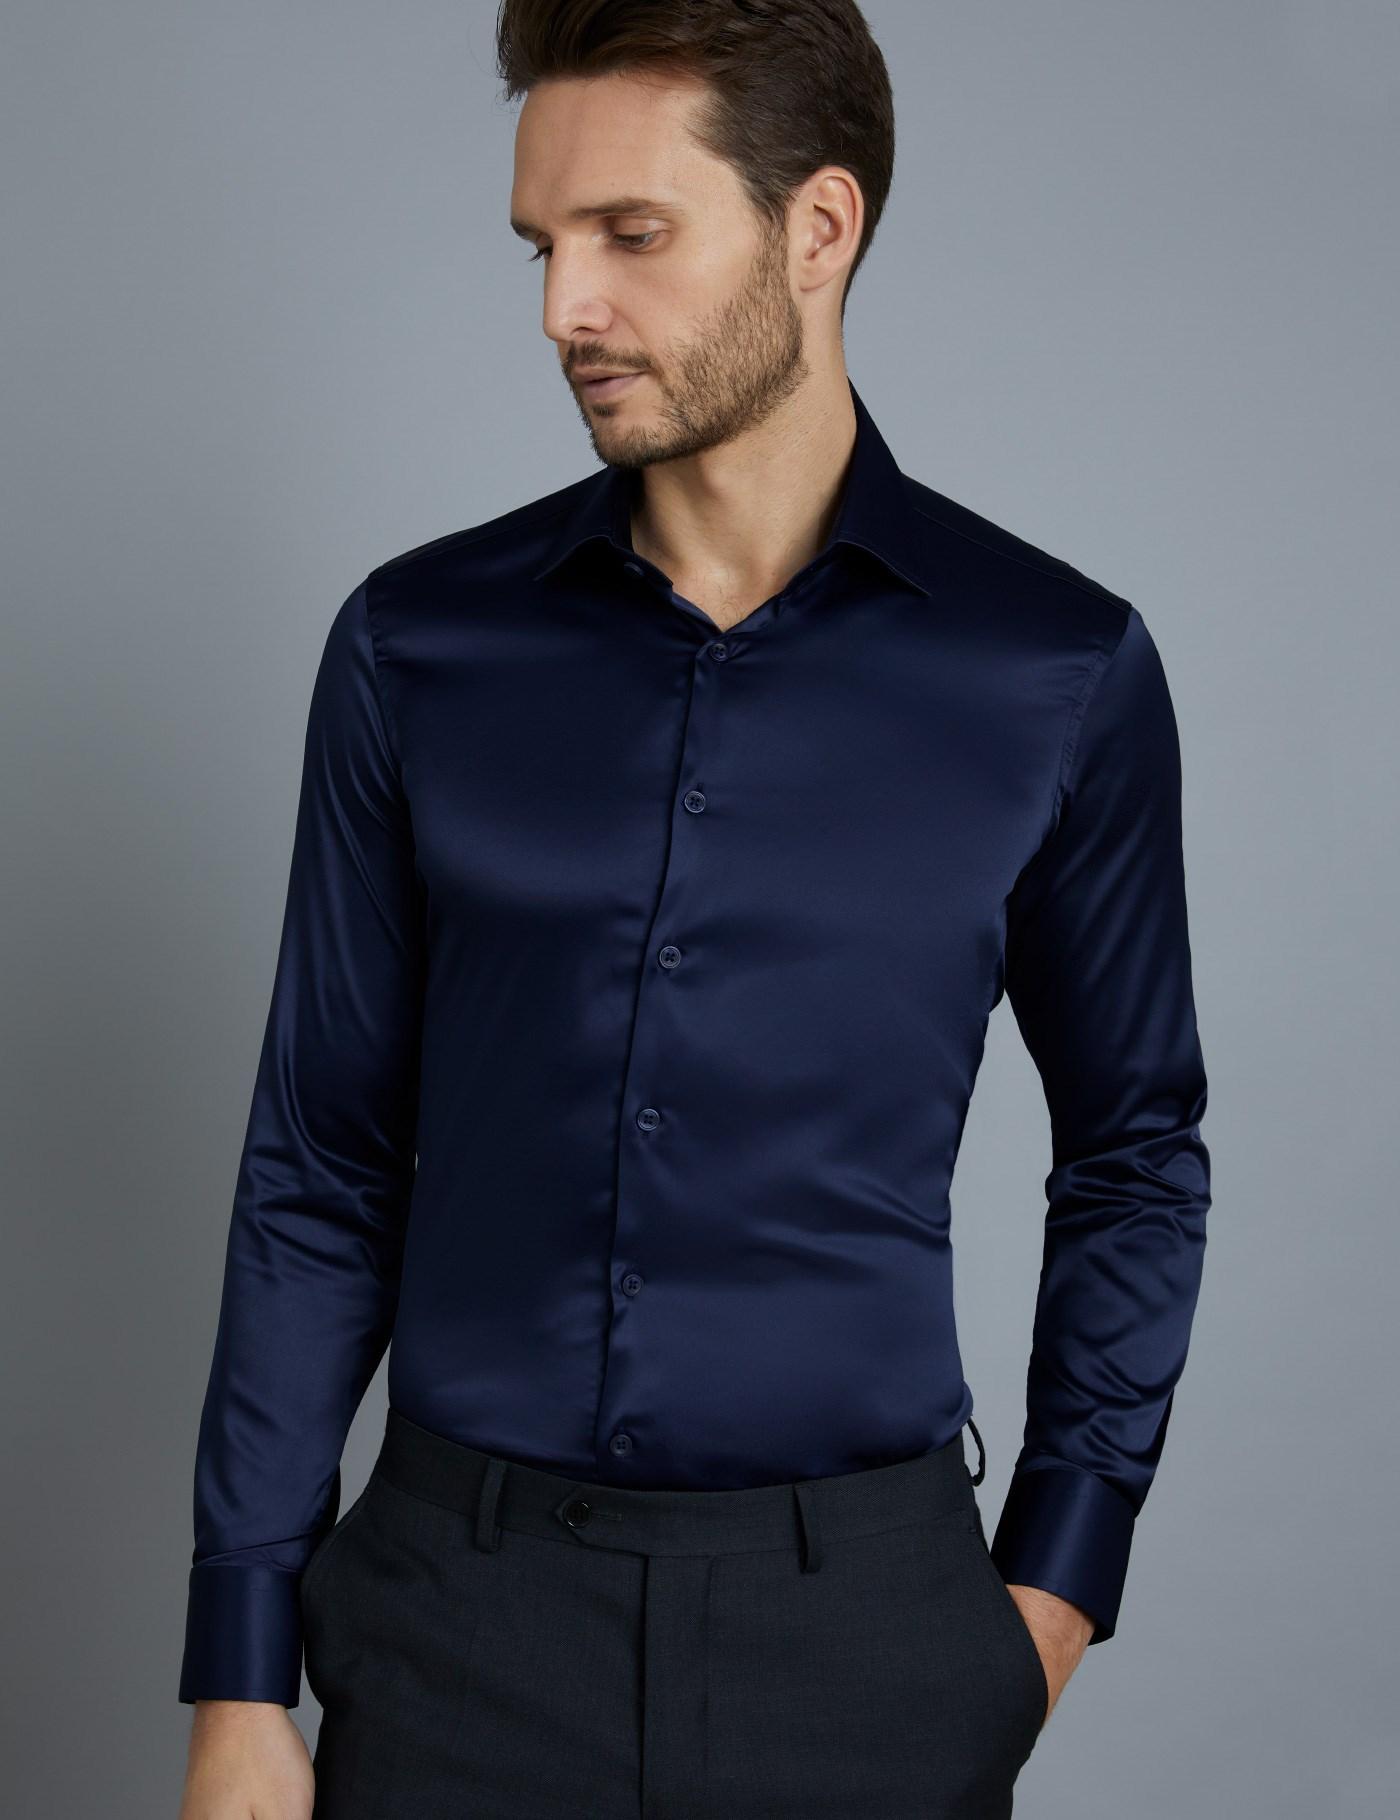 Hawes & Curtis Navy Satin Slim Fit Stretch Shirt in Blue for Men - Lyst